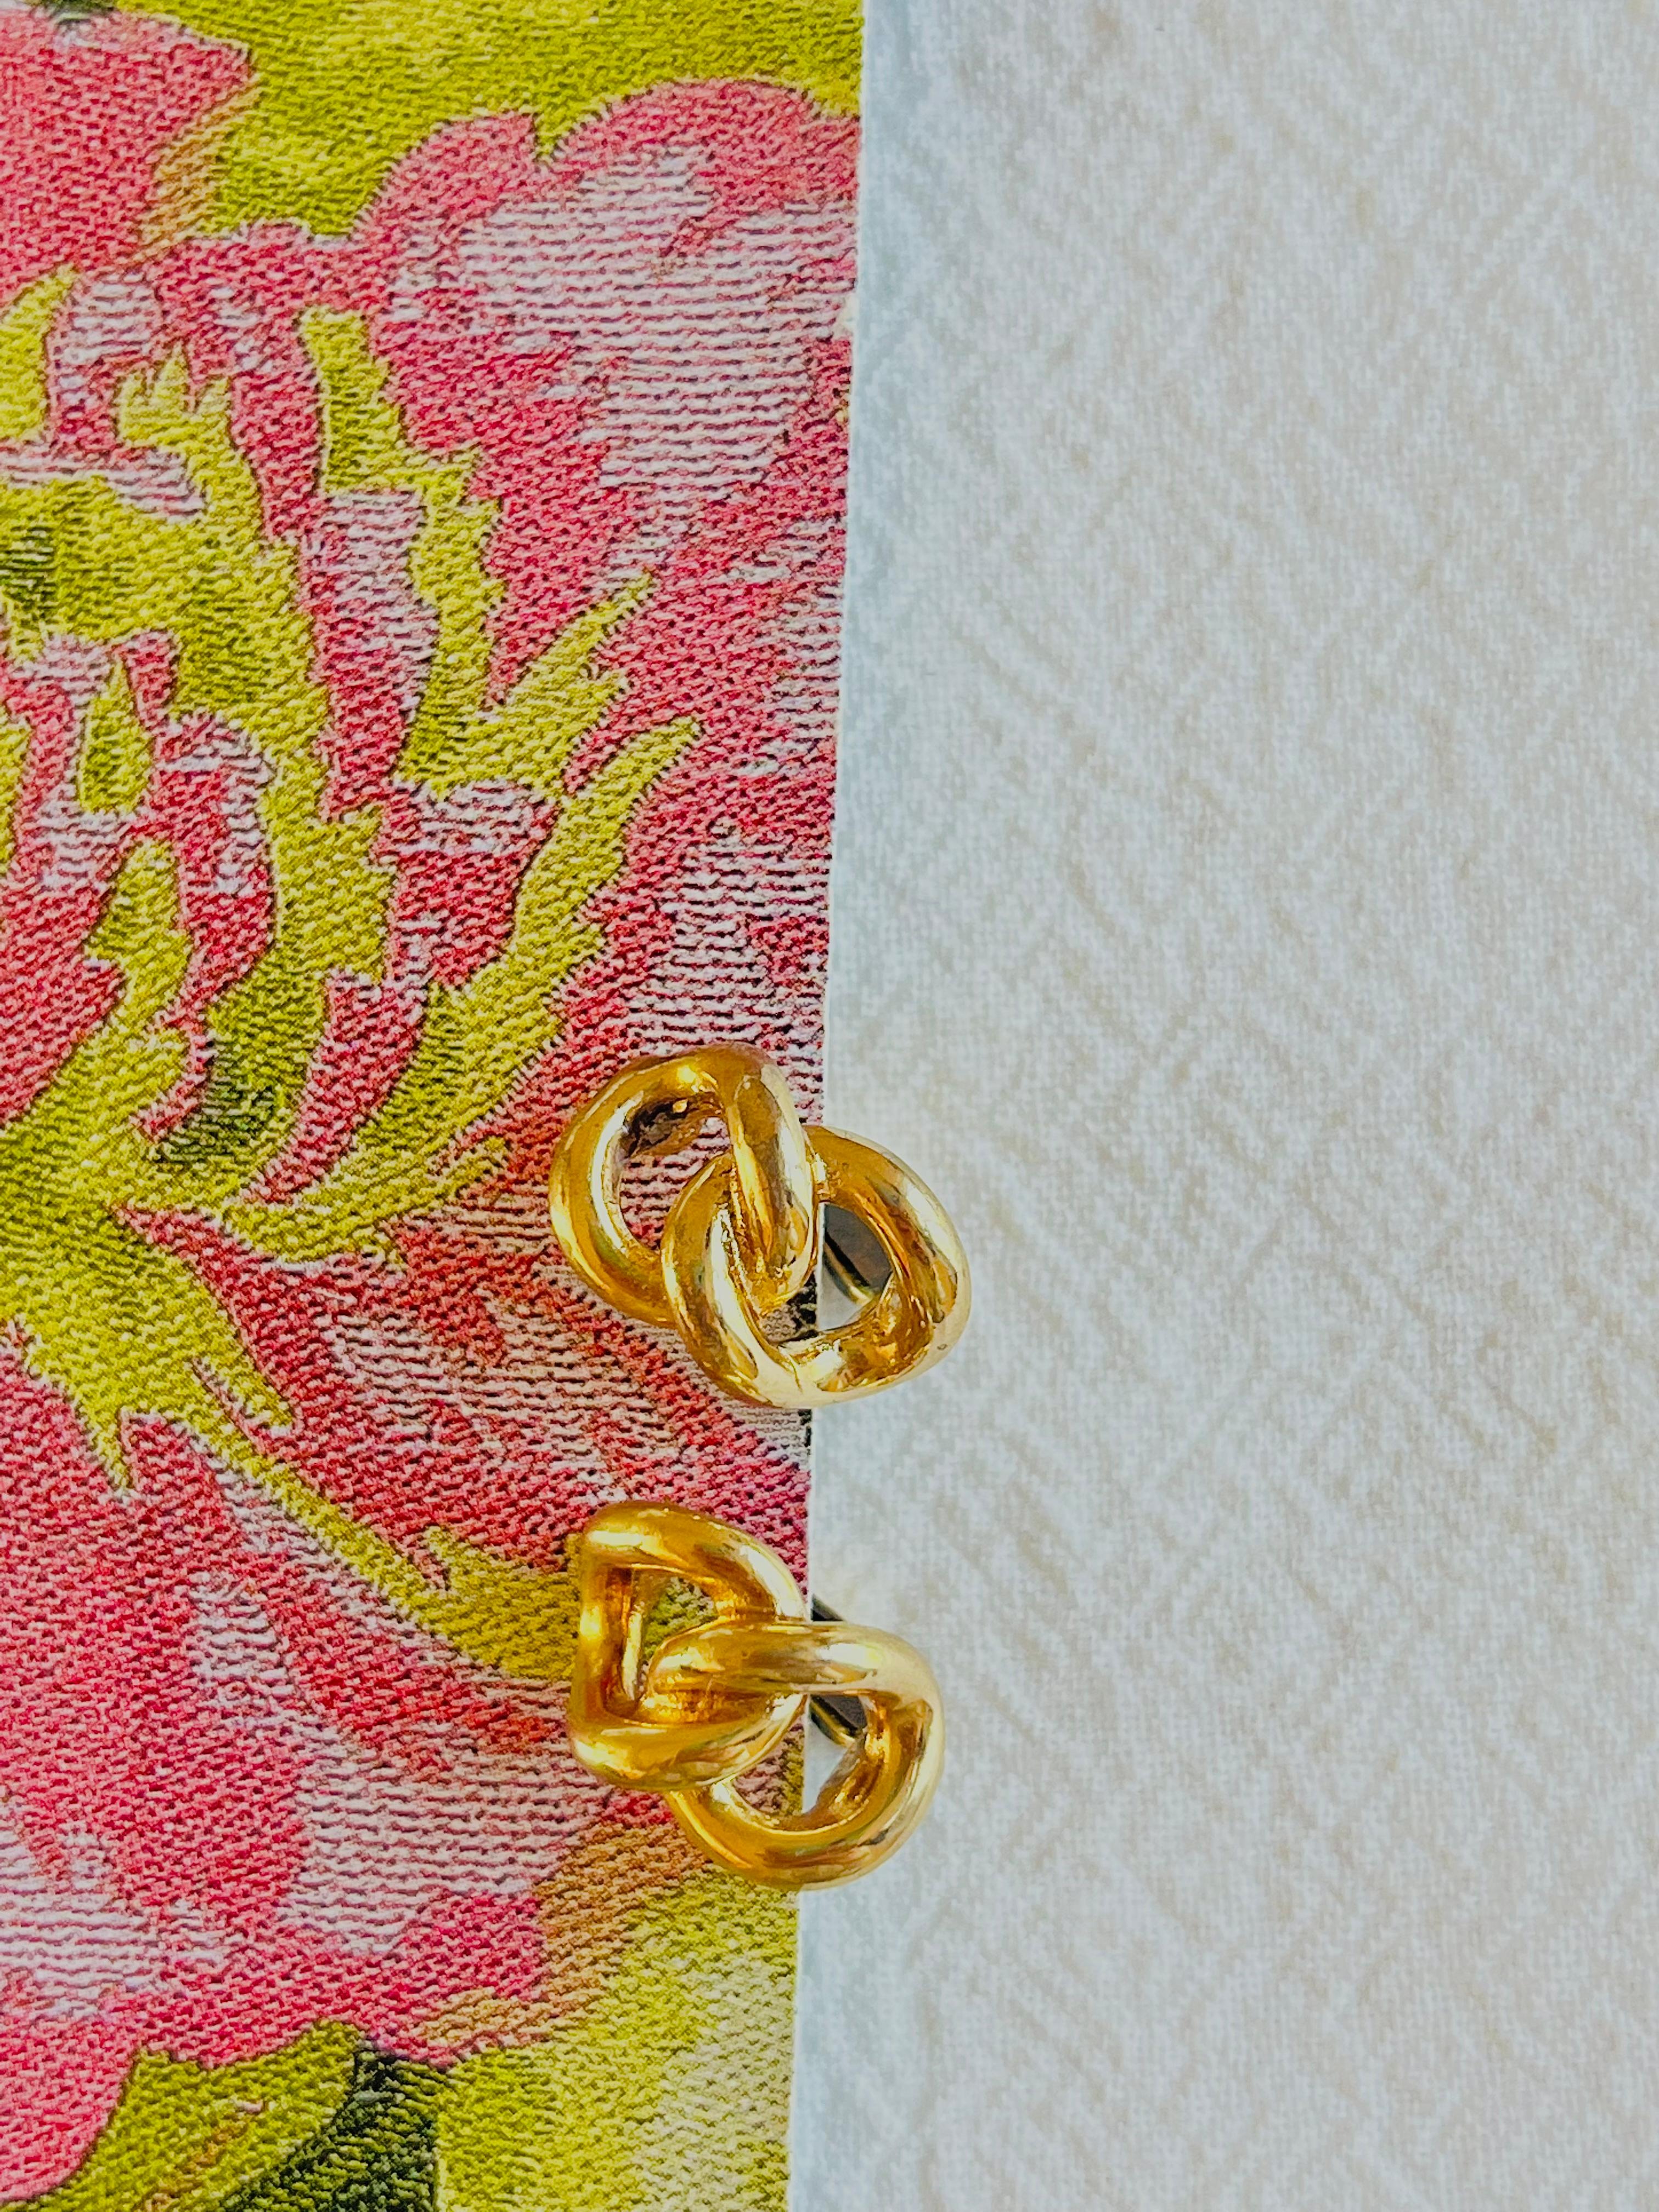 Christian Dior Vintage 1980s Double Chain Rope Interlocked Knot Clip Earrings, Gold Tone

Very good condition. Light scratches or colour loss, barely noticeable. 100% Genuine.

A very beautiful pair of earrings by Chr. DIOR, signed at the